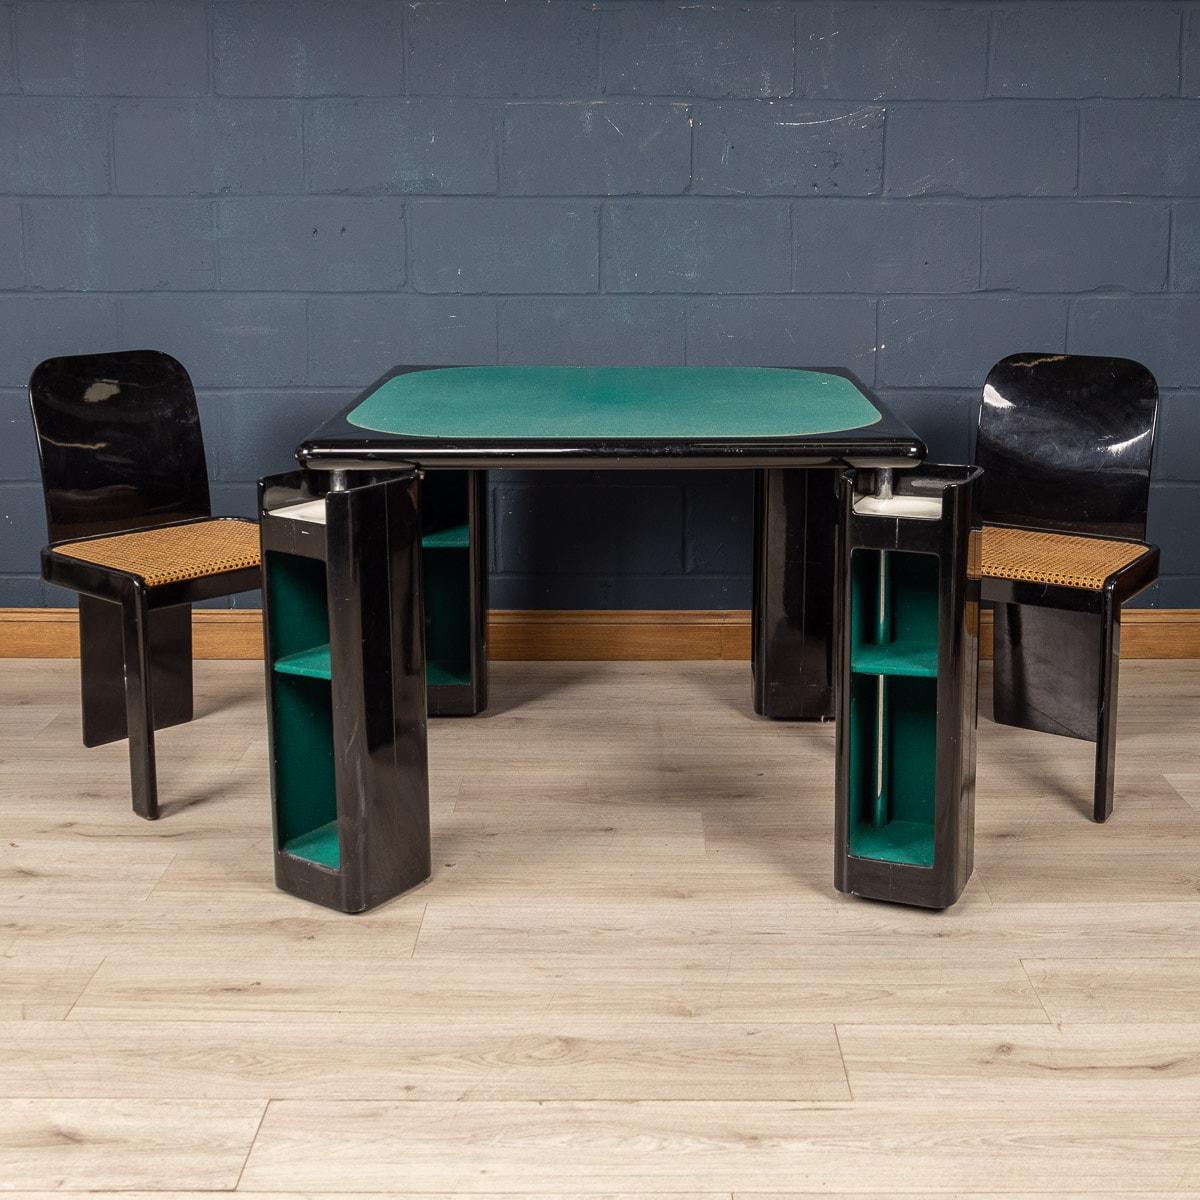 A gorgeous games table and chairs designed by Pierluigi Molinari and produced by Pozzi in Milan, Italy in the 1970s. The set presents itself in perfect vintage condition, complete with chairs. What makes these games tables different from the rest